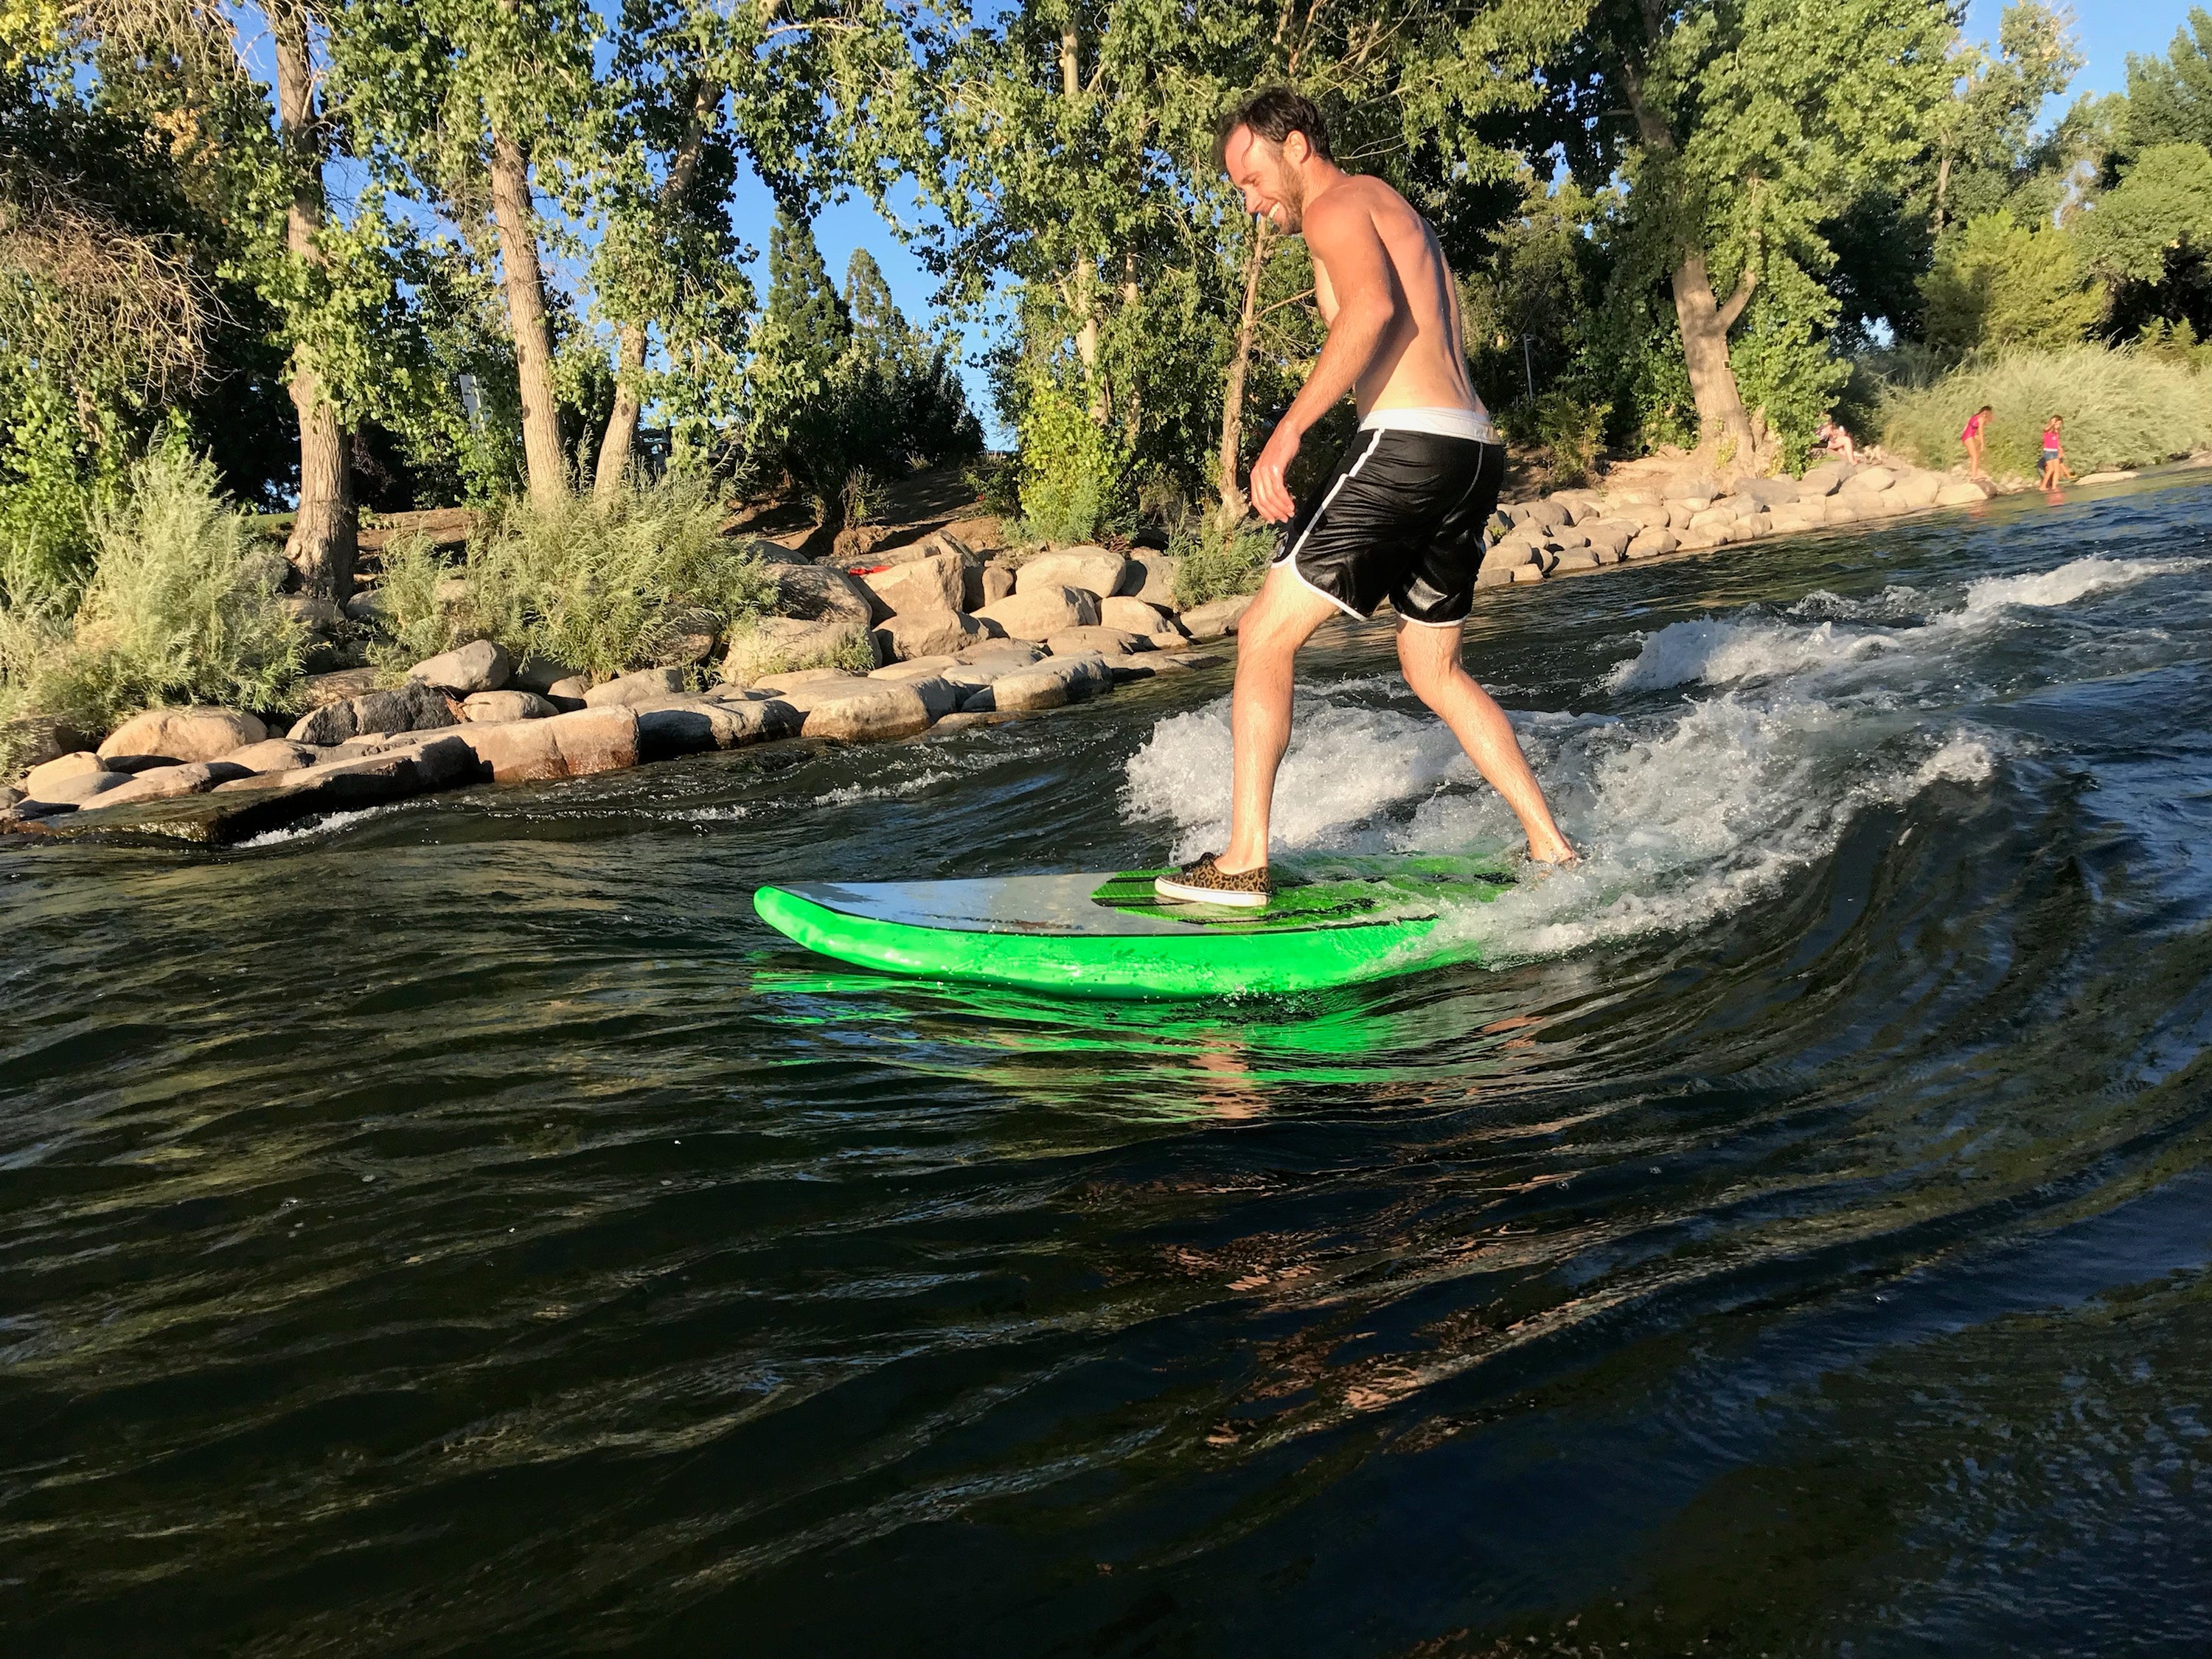 Surfing the Truckee River in Reno, Nevada